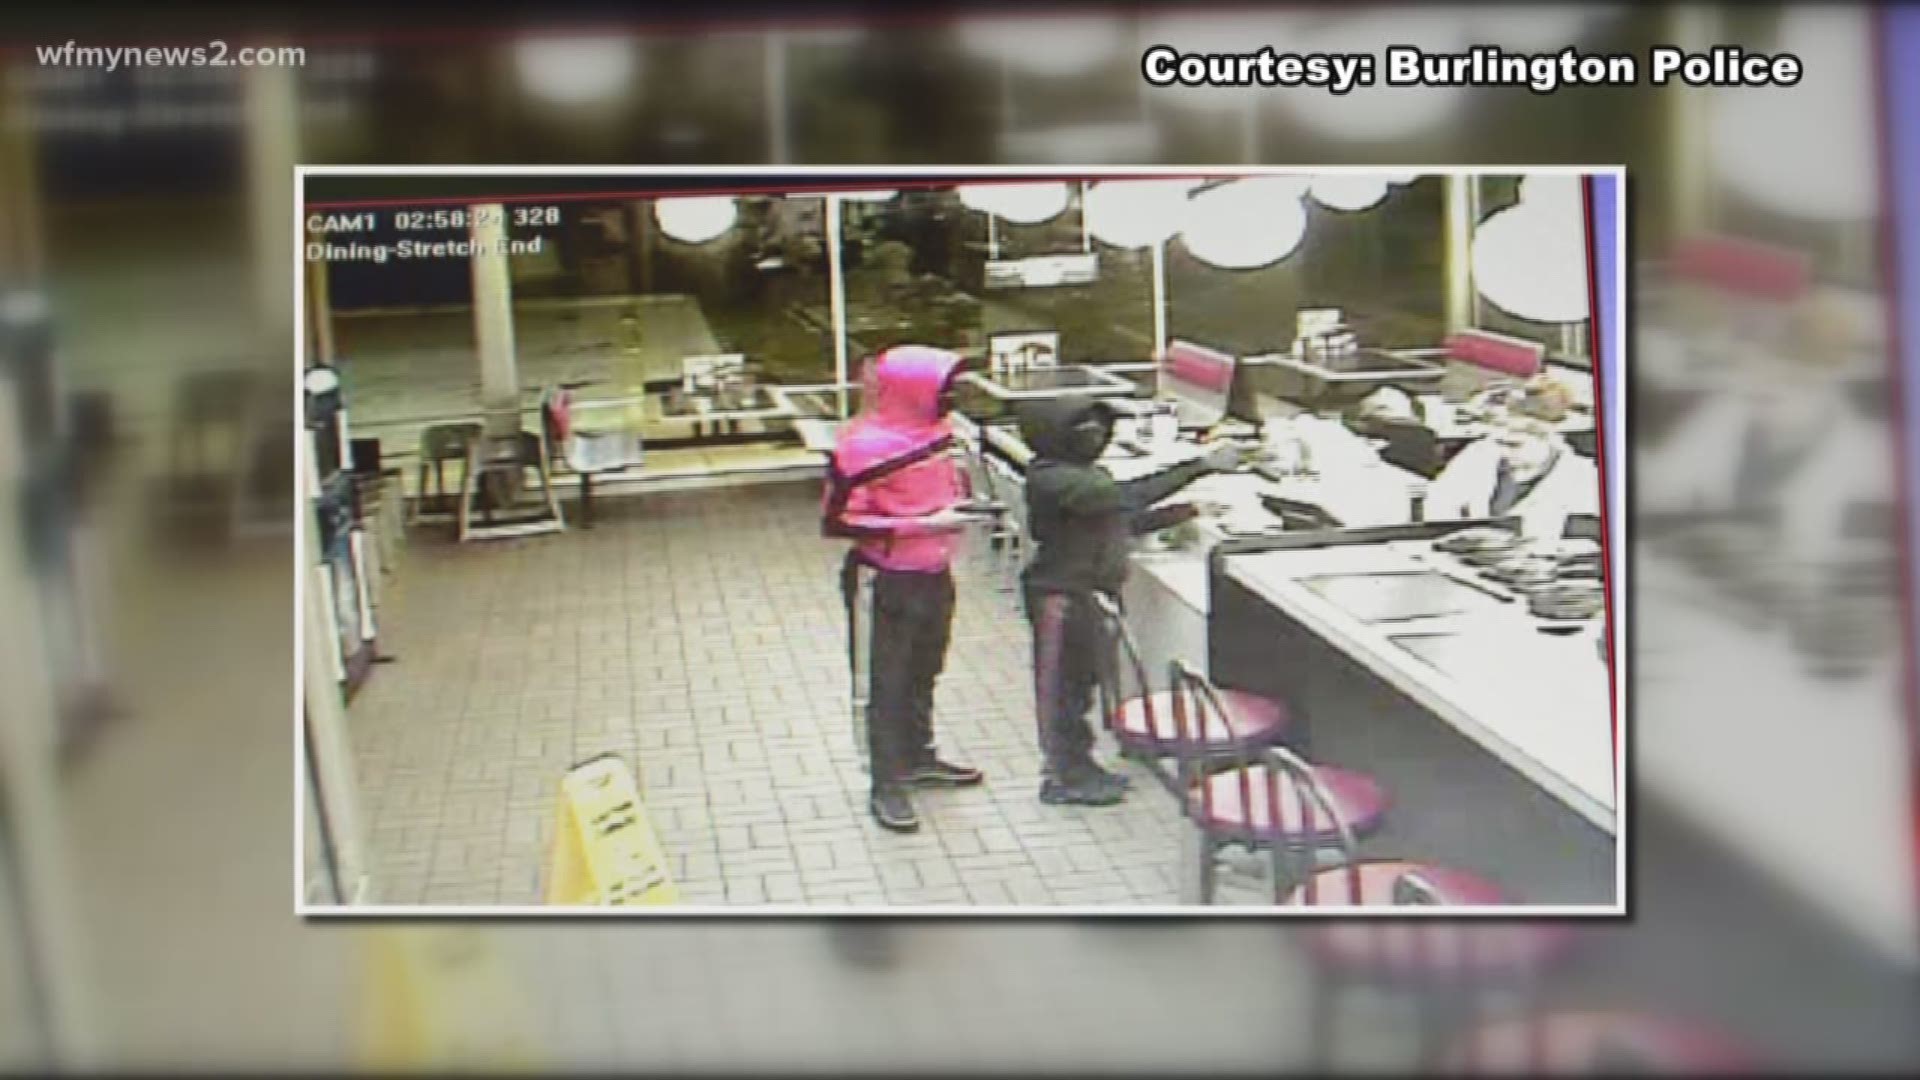 Investigators say a Waffle House in Burlington was robbed, followed by Carolina’s Diner and McDonald’s in Greensboro.